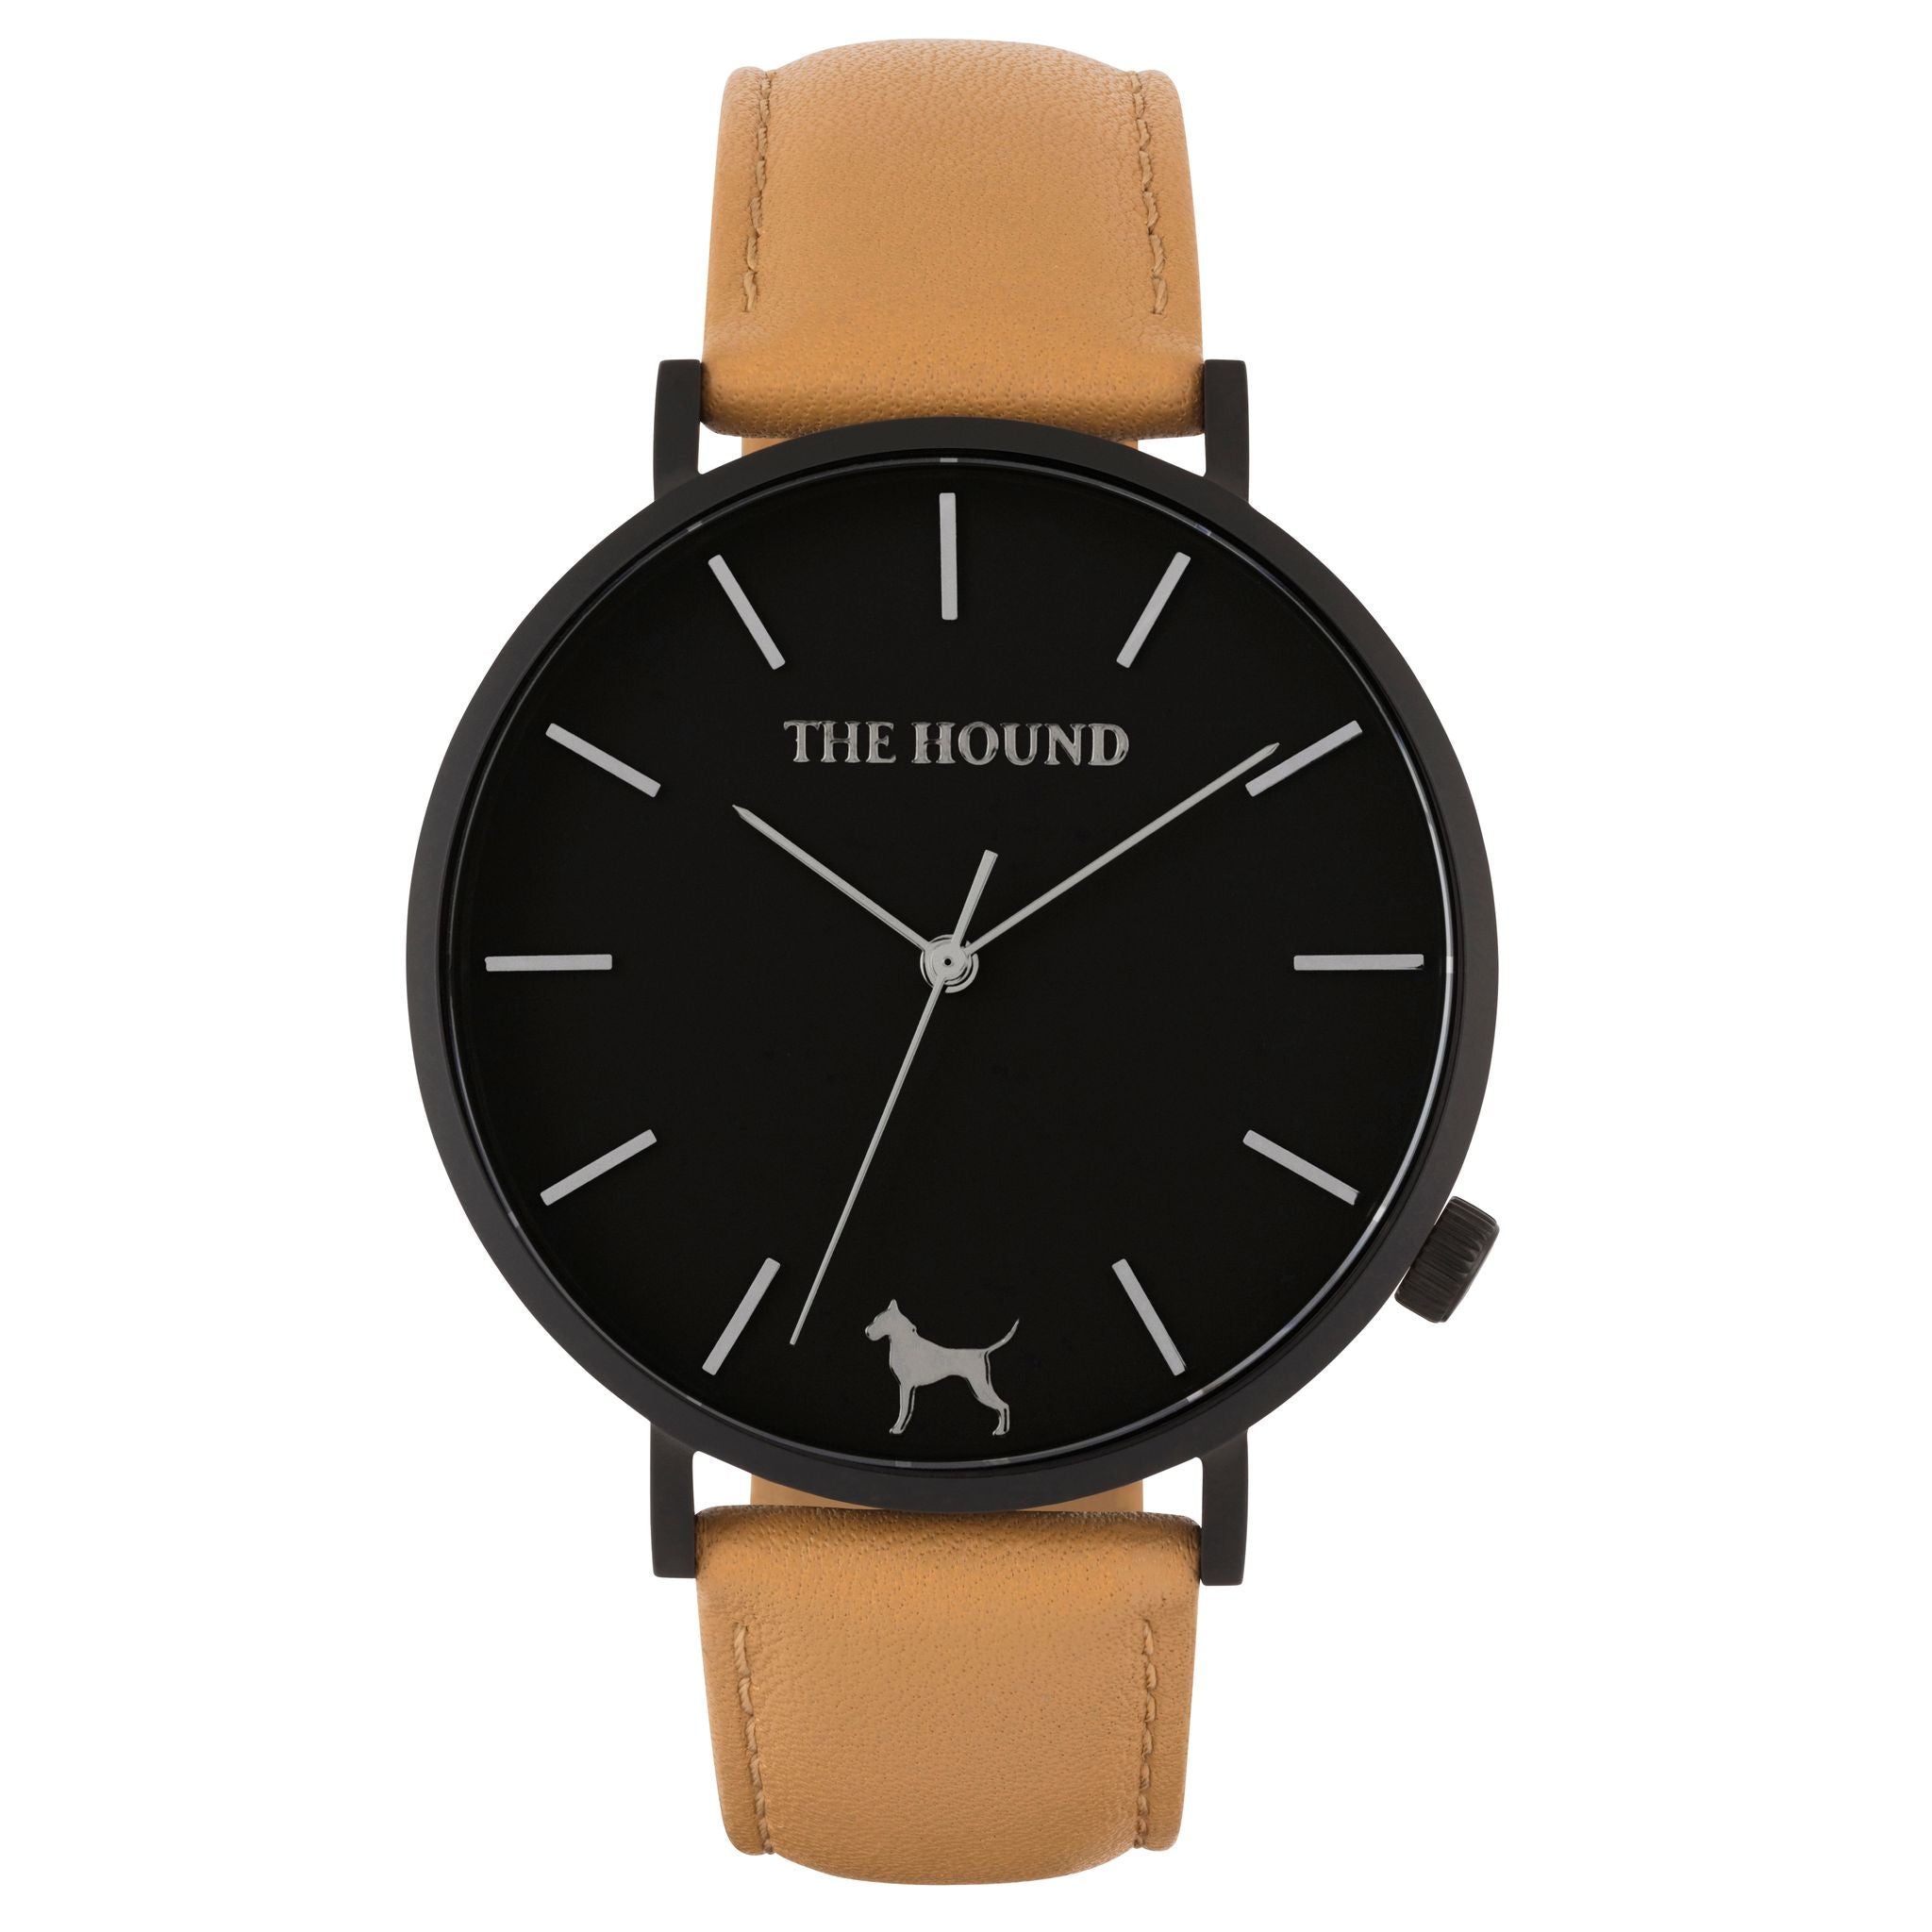 Extra Watch - Matte Black & Camel Leather